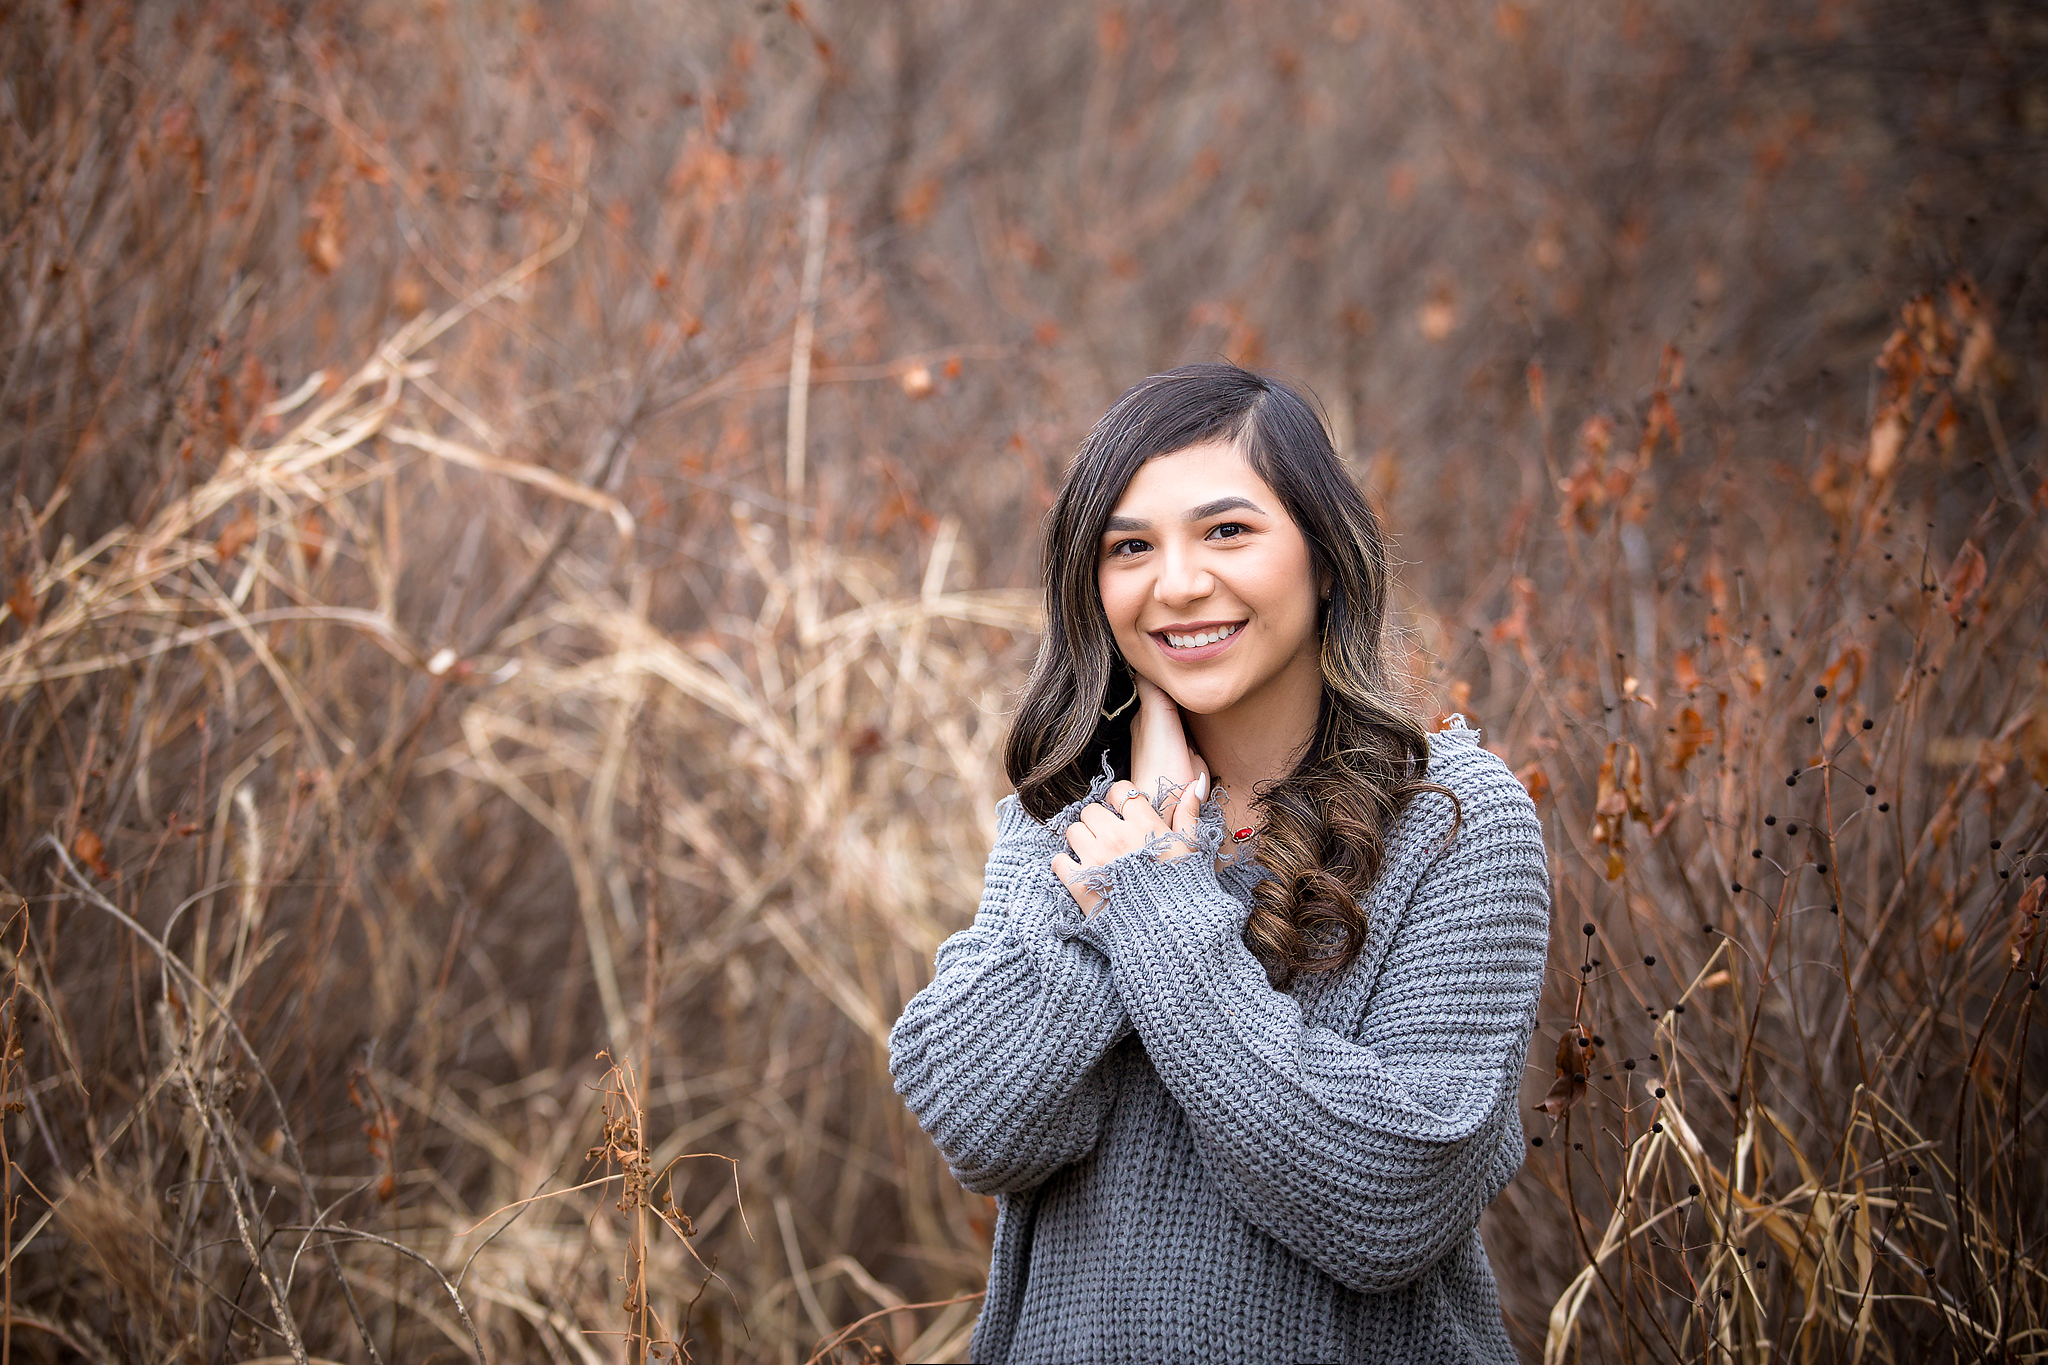 Palo Duro Canyon senior session in the weeds during the fall